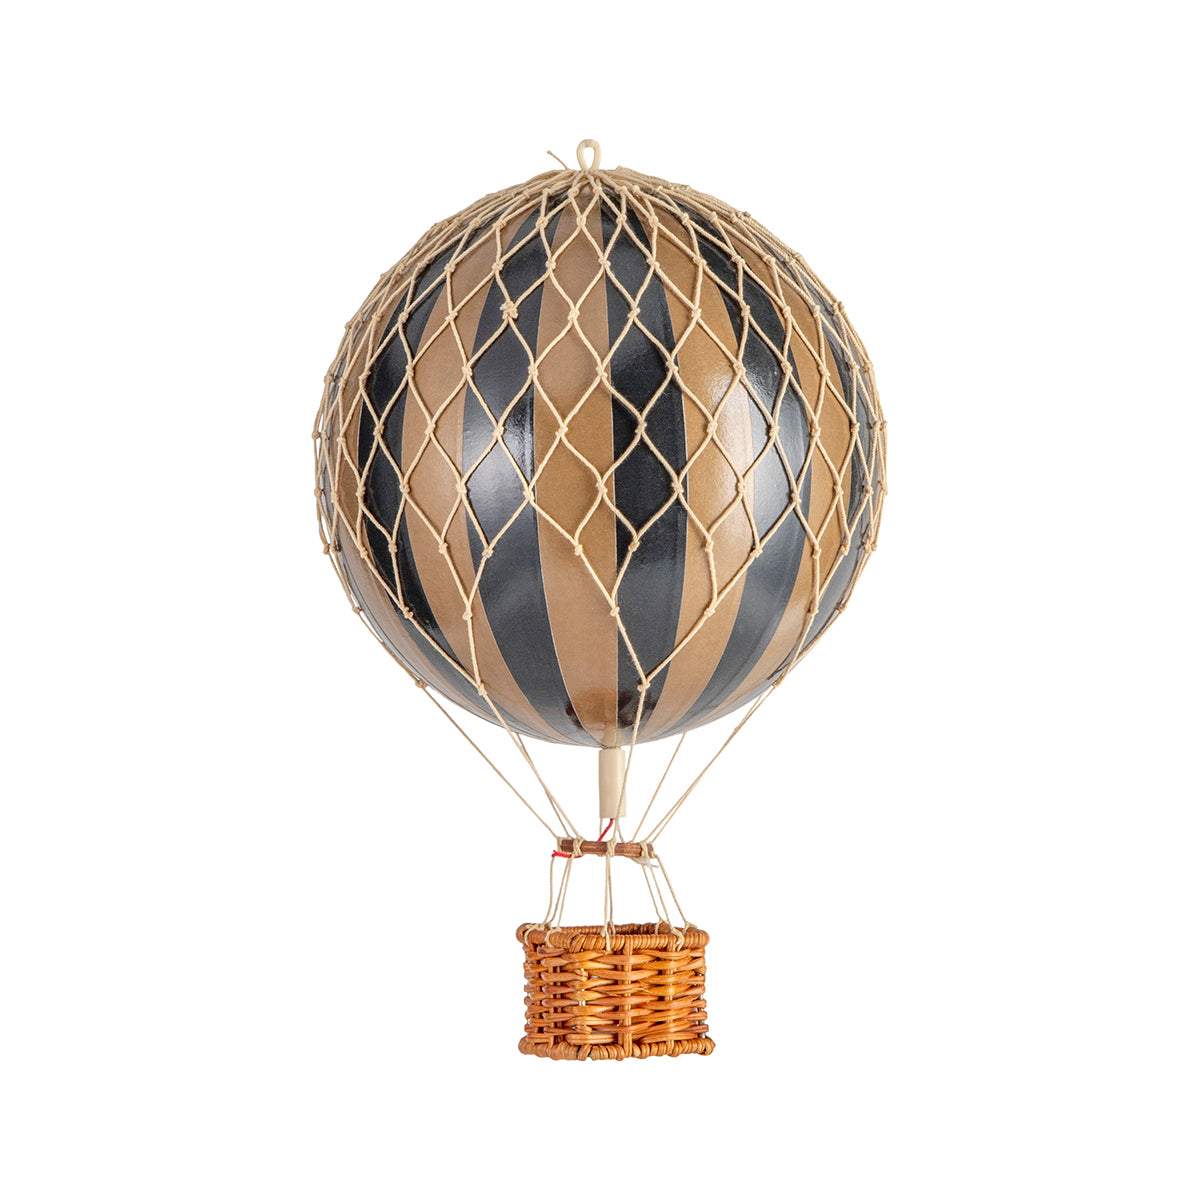 A Wonderen Small Hot Air Balloon - Travels Light with a basket, soaring through the sky in black and white.